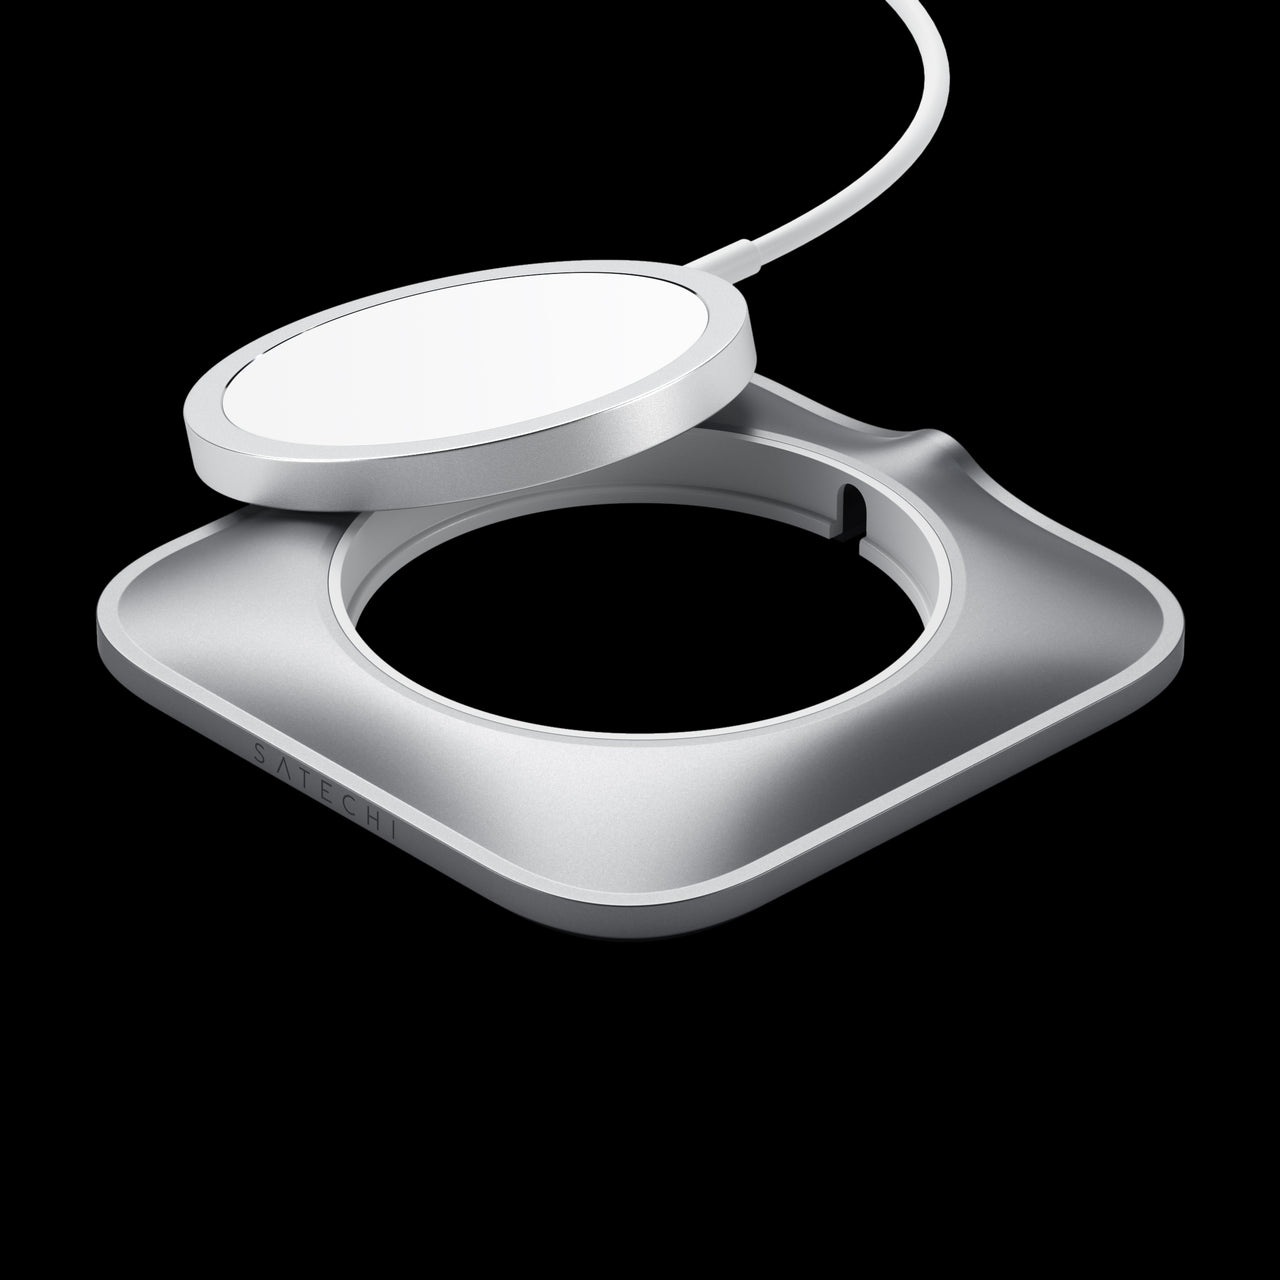 Aluminum Dock for MagSafe Charger